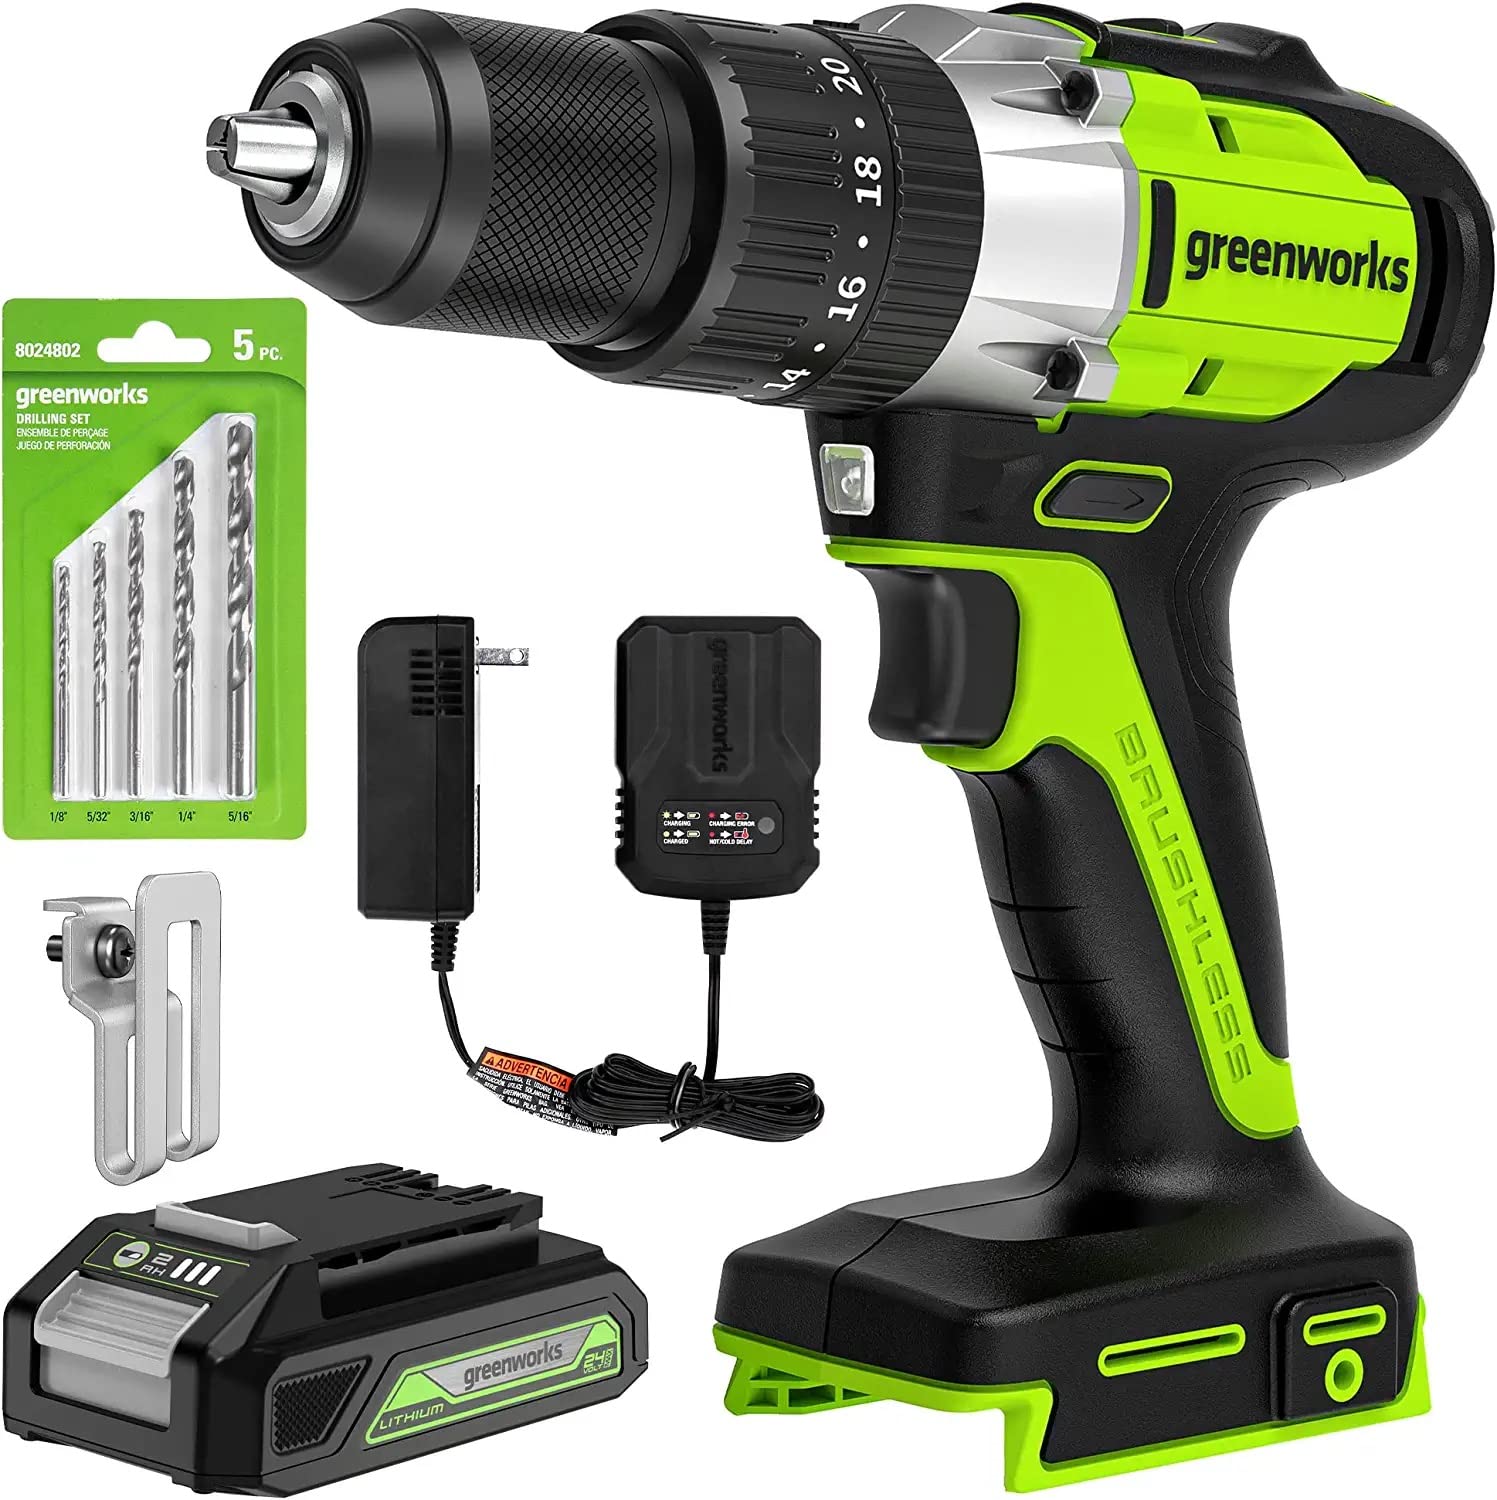 Greenworks 24V Brushless 1/2" Hammer Drill (Metal Chuck 20+3 Clutch / LED Light) + 5 PC Drill Bits, 2.0Ah Battery & Charger Included $58.09 + Free Shipping